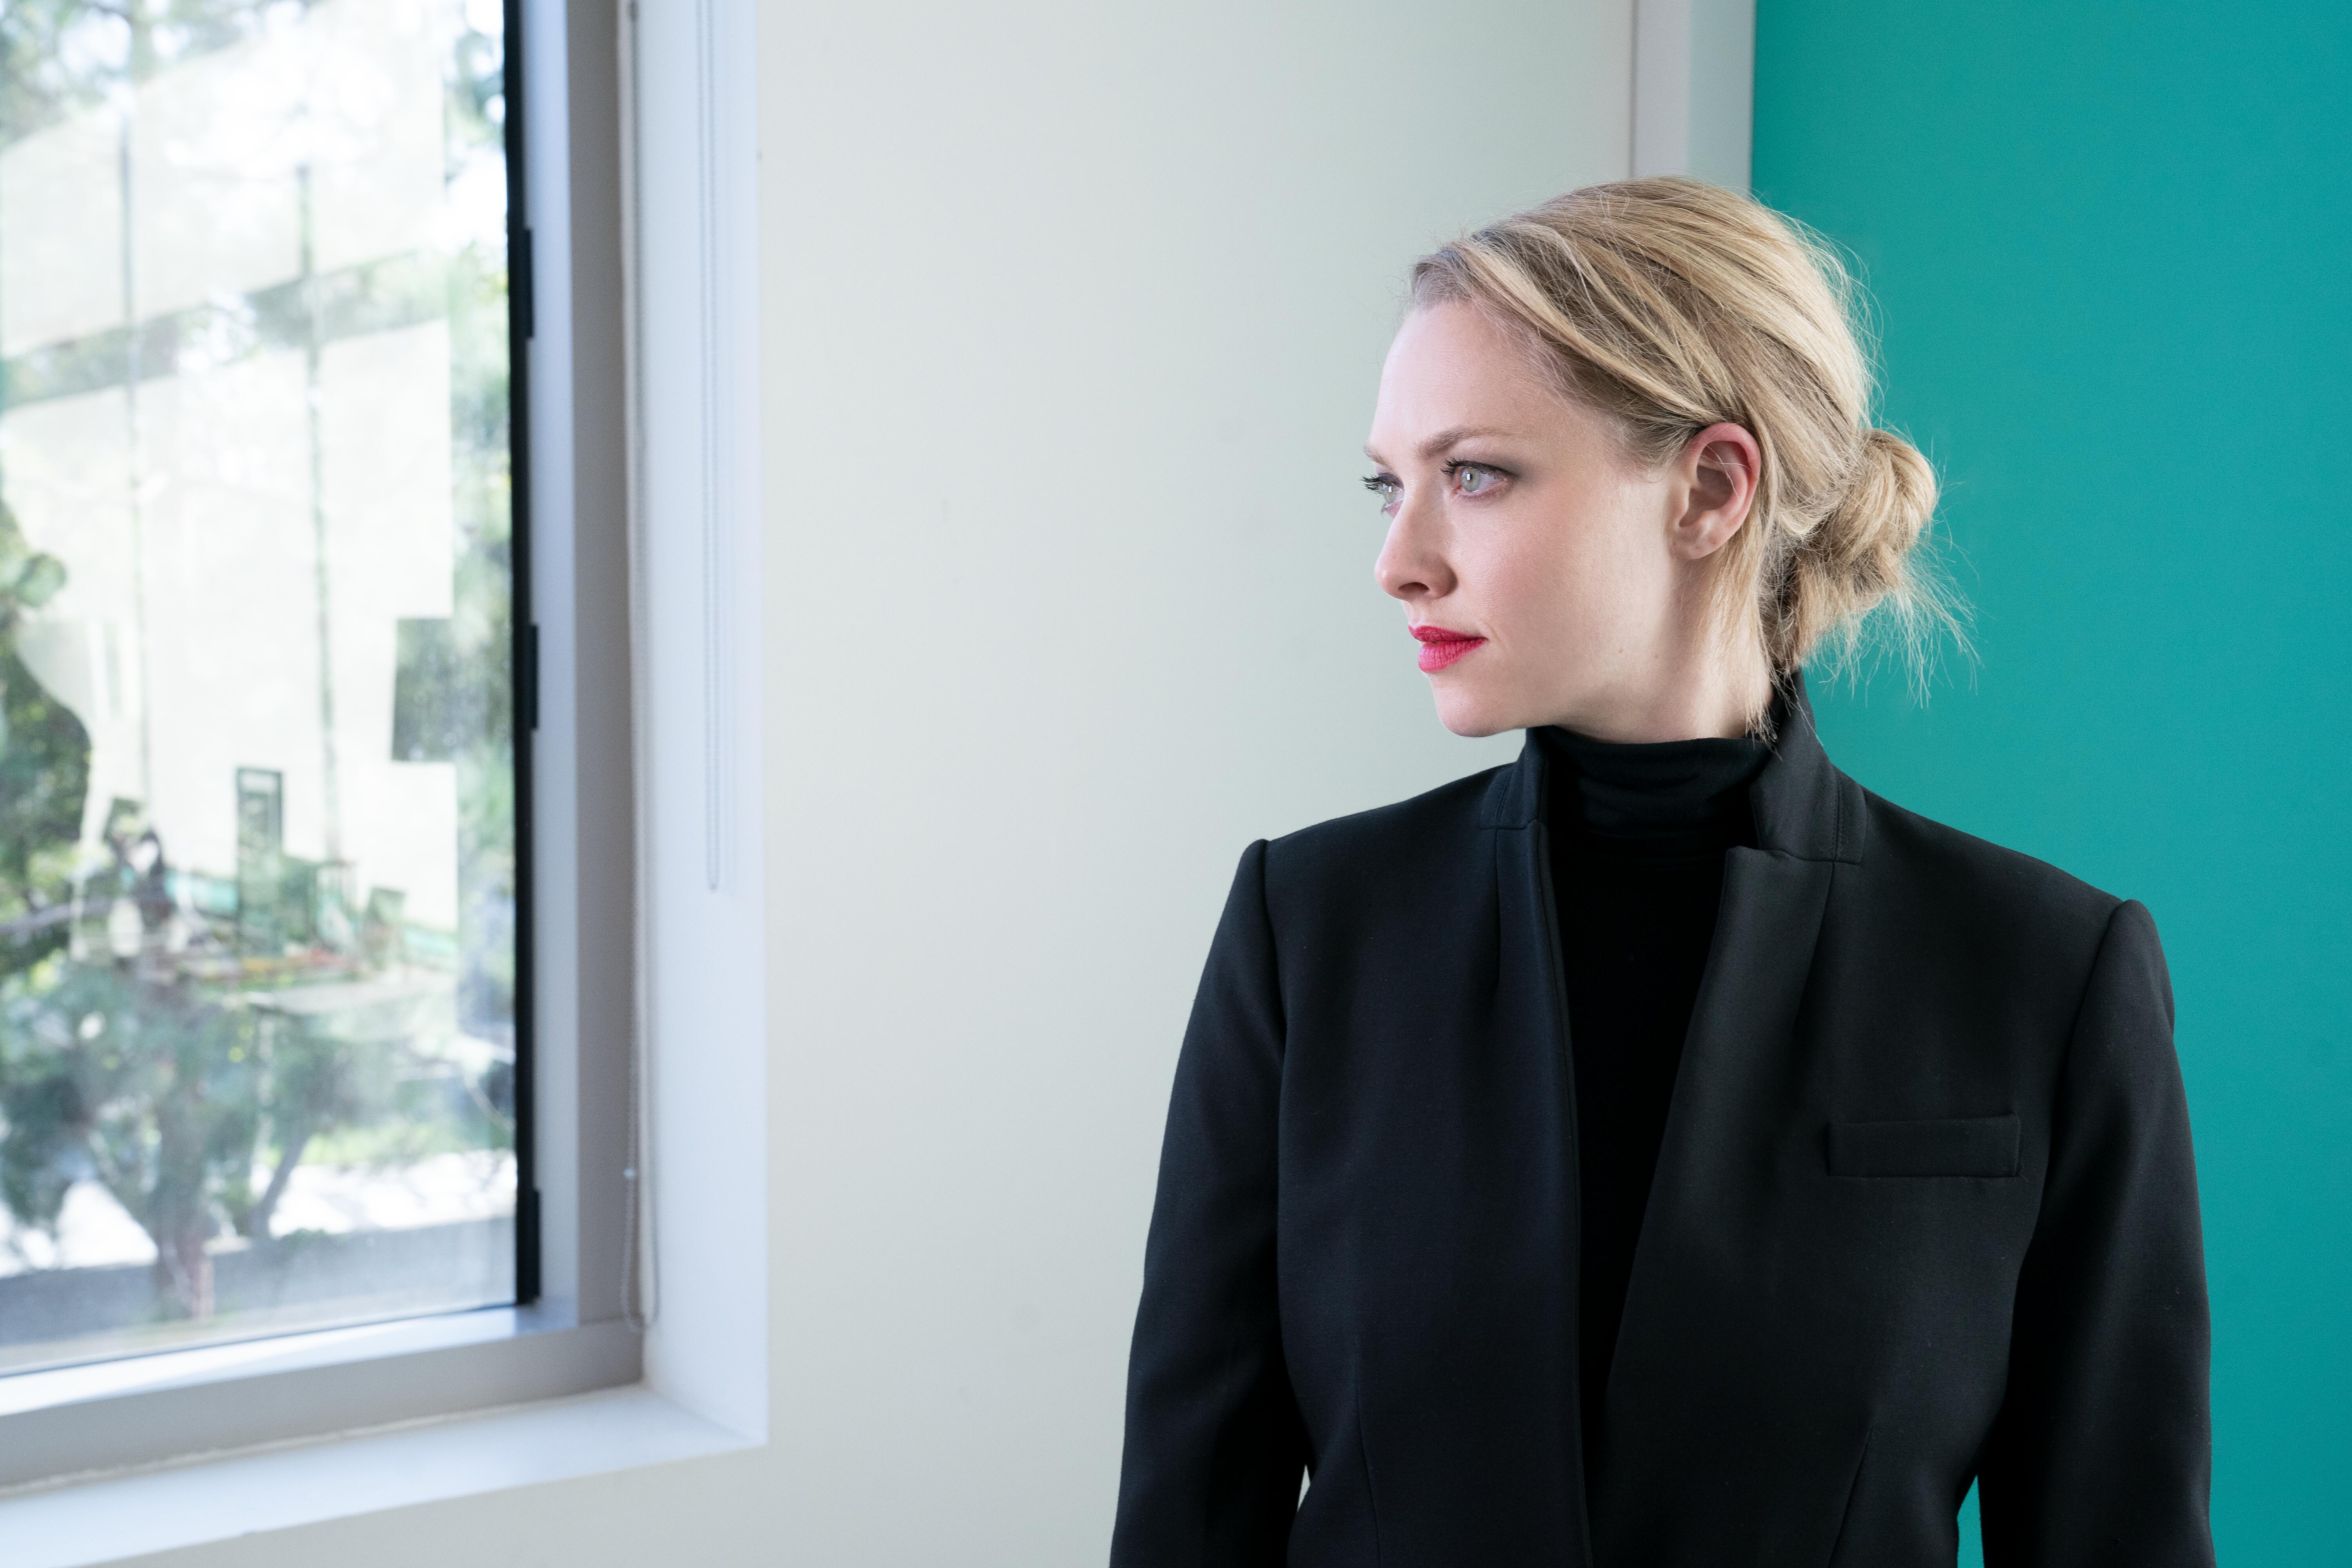 Amanda Seyfried as Elizabeth Holmes in 'The Dropout' Episode 5. She's wearing a black turtle neck and black blazer and standing in front of white and green walls.